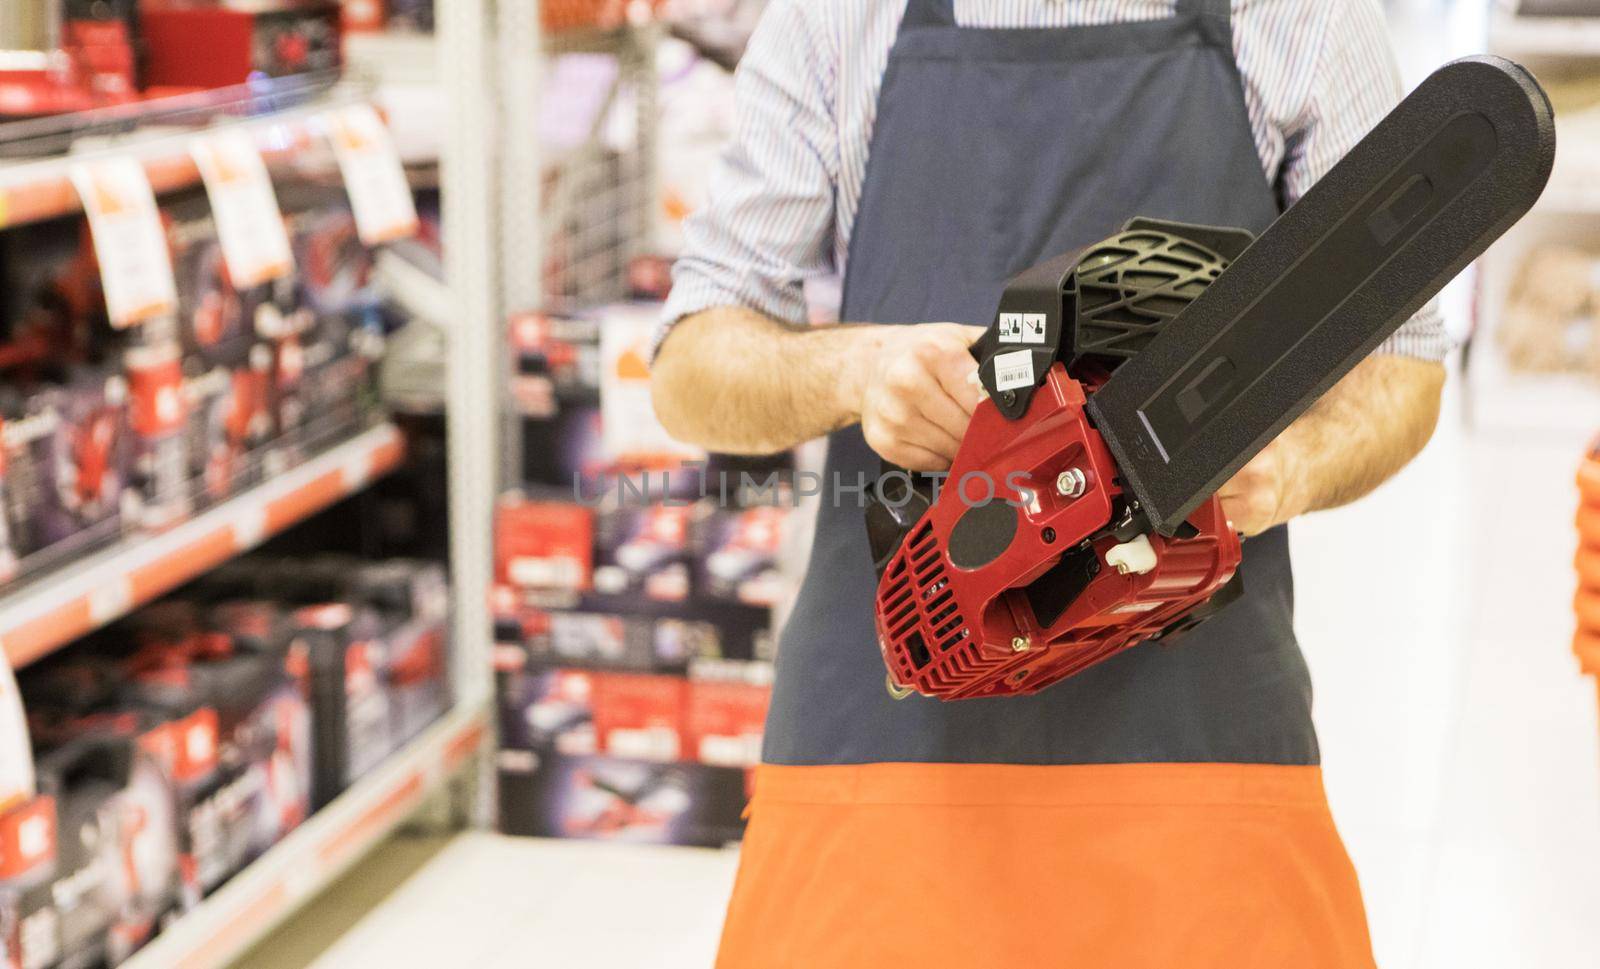 Man holding new chainsaw at the store by ferhad